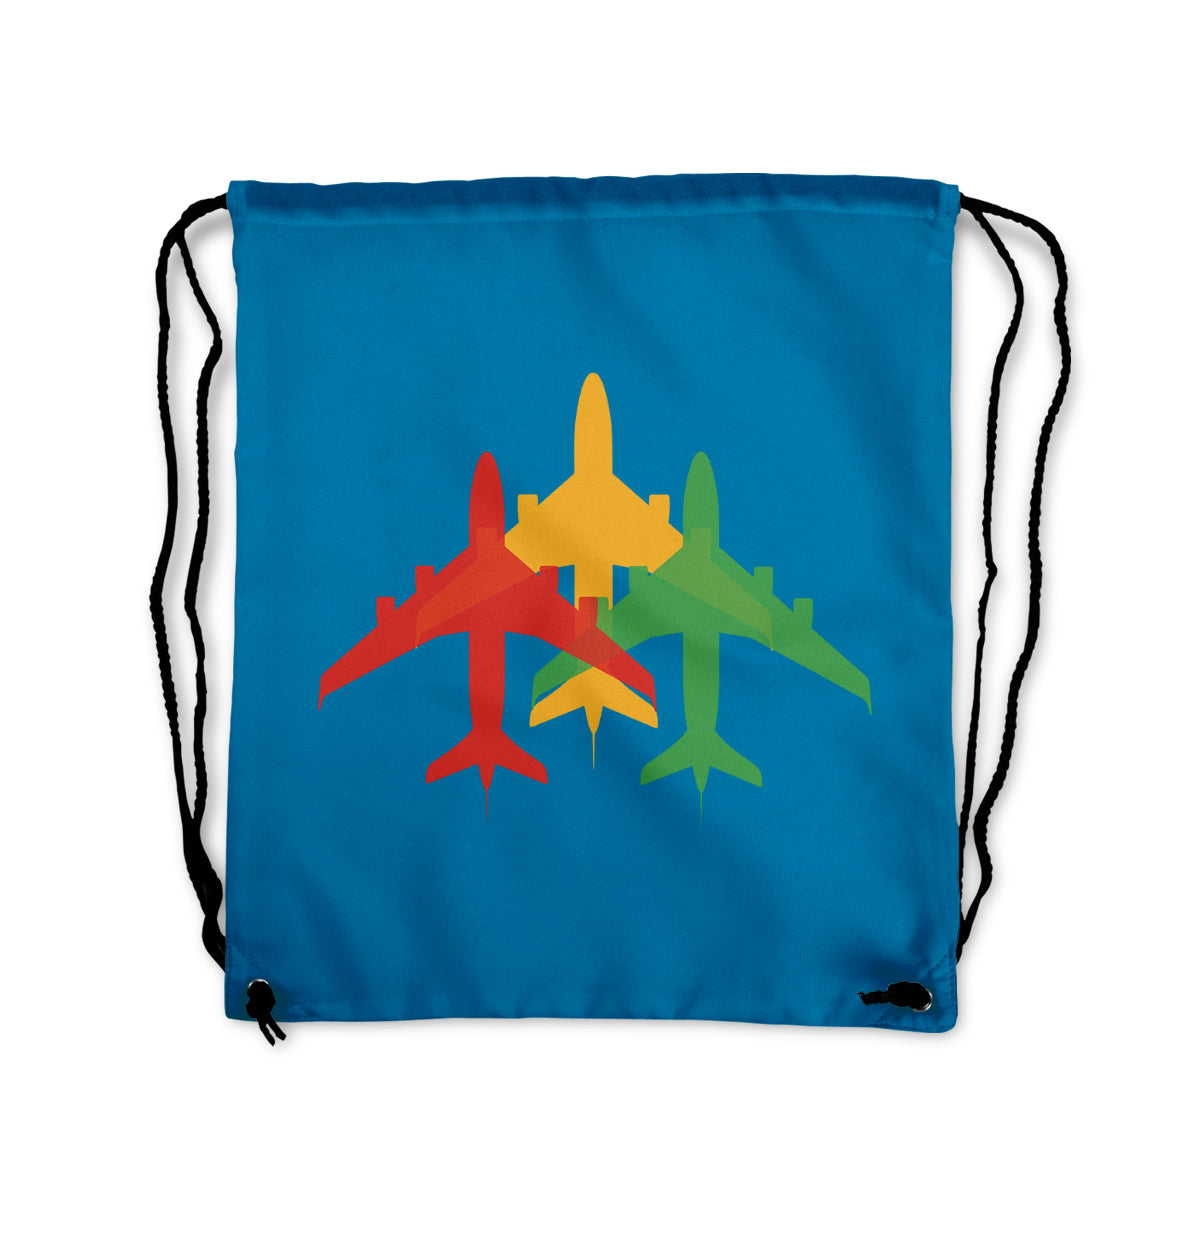 Colourful 3 Airplanes Designed Drawstring Bags